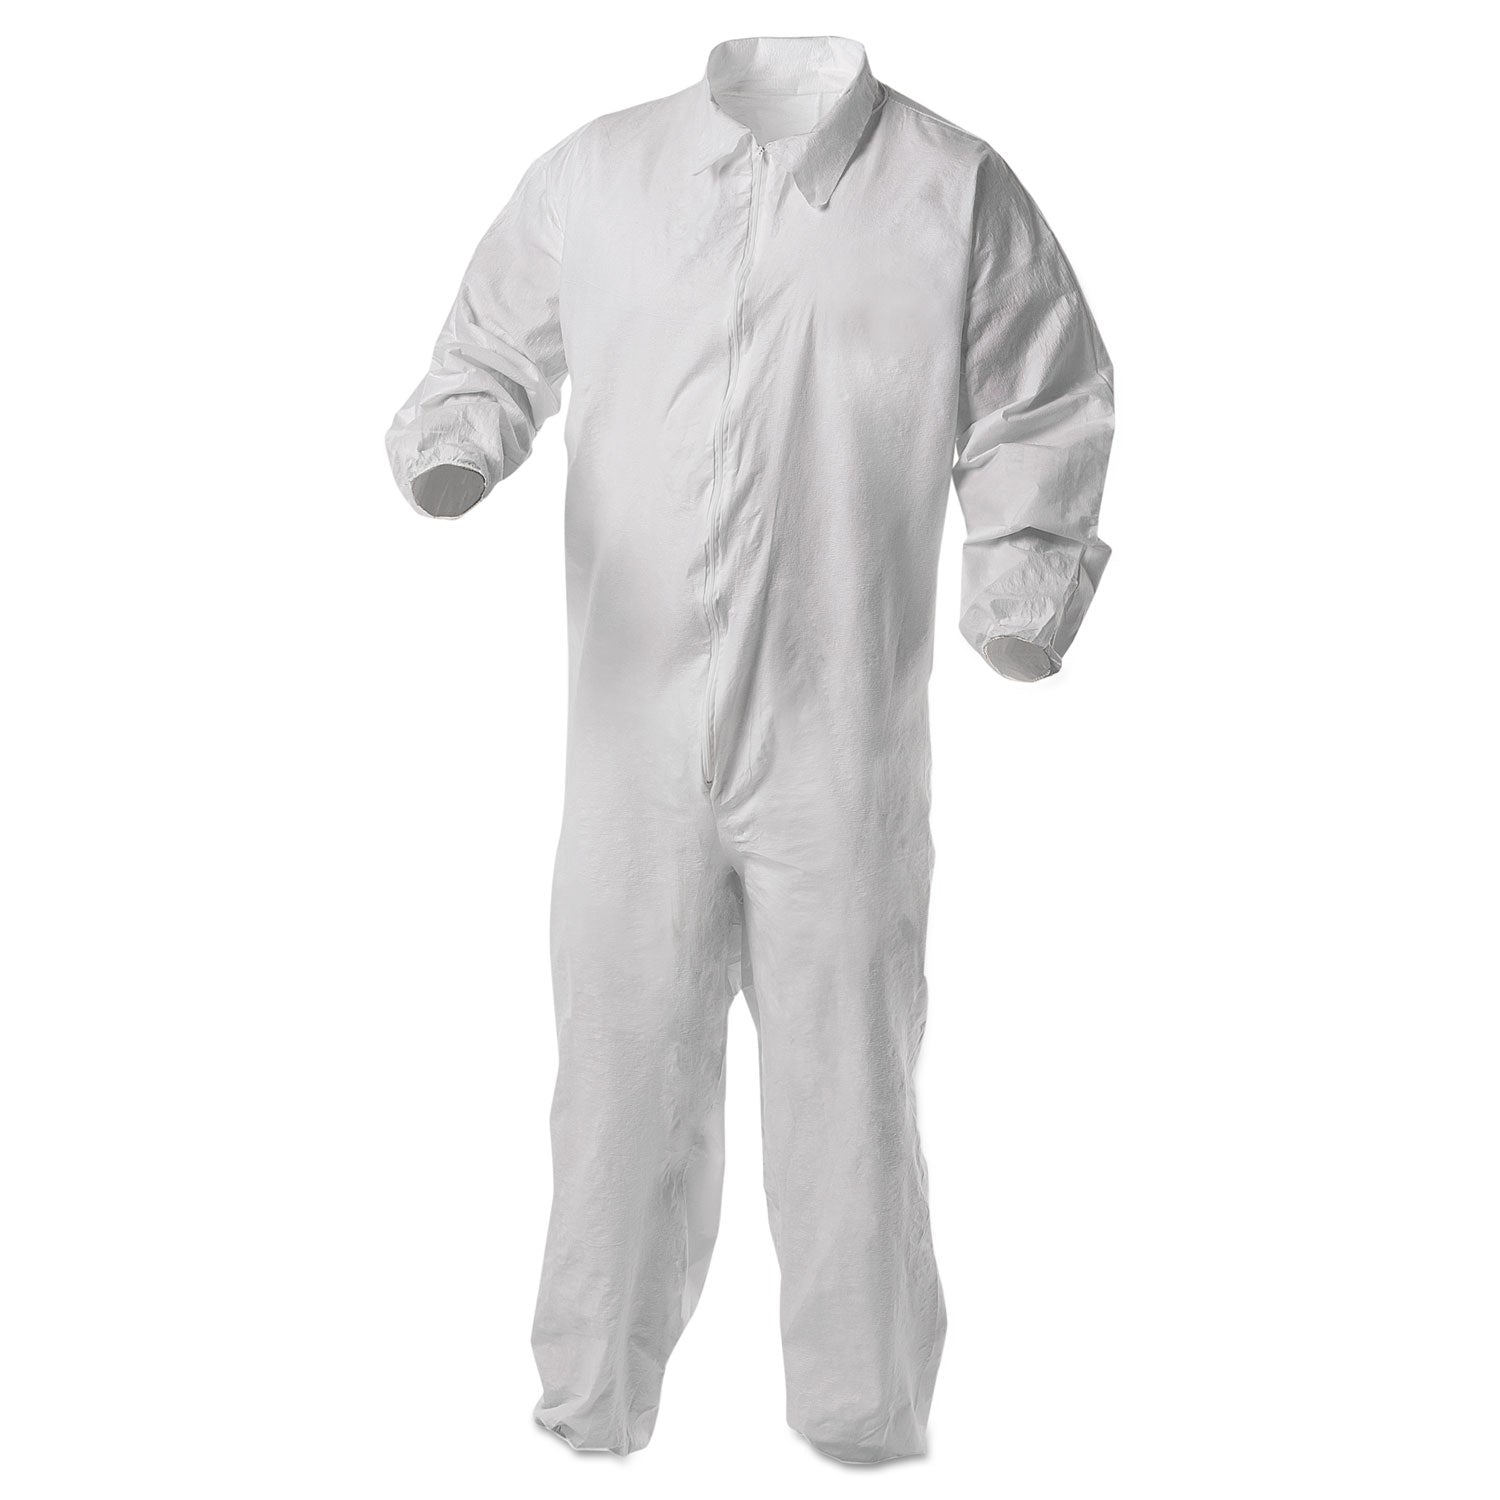 a35-liquid-and-particle-protection-coveralls-zipper-front-elastic-wrists-and-ankles-2x-large-white-25-carton_kcc38930 - 1